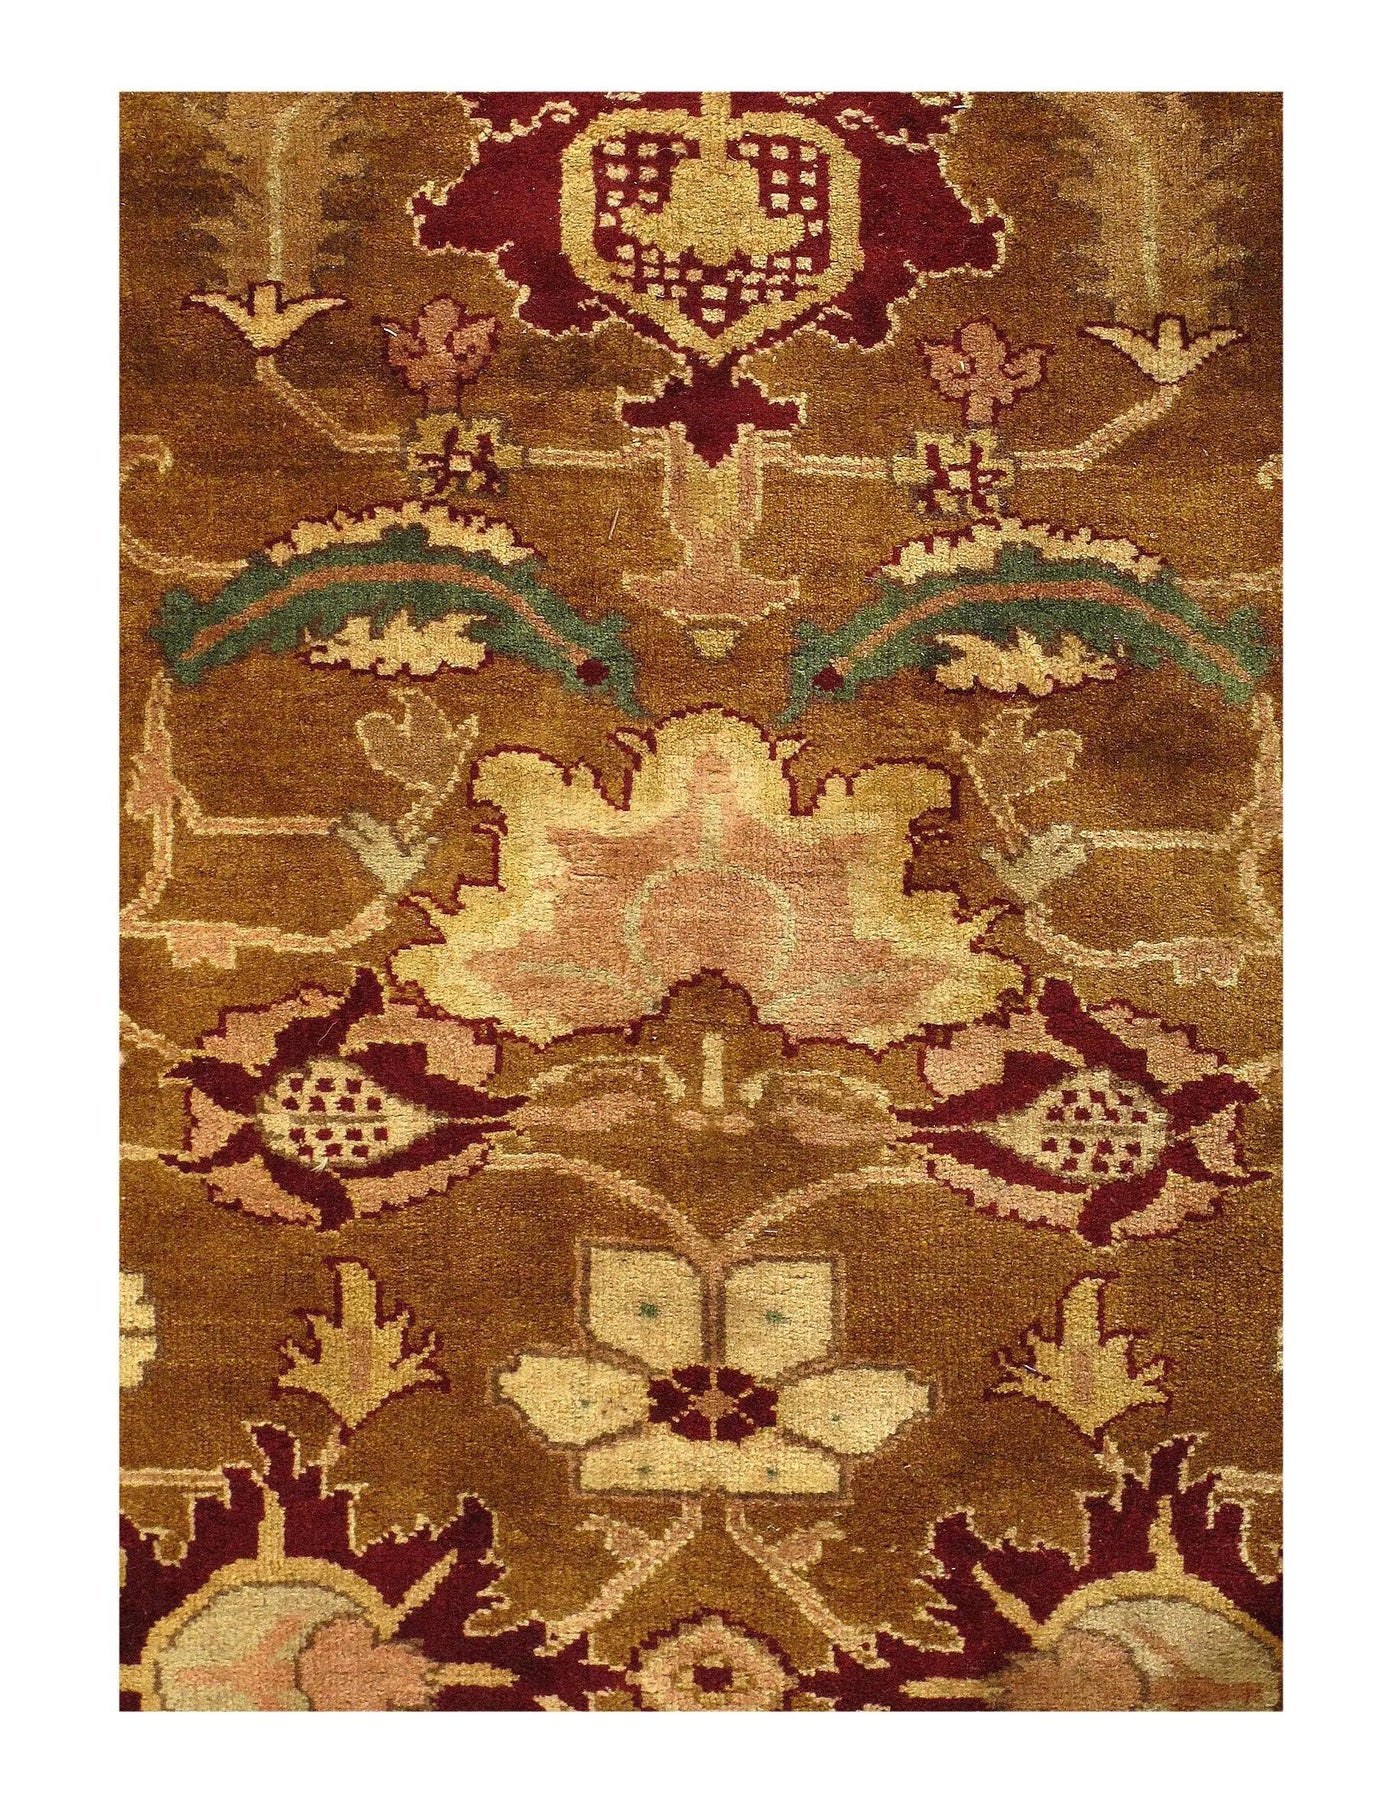 Indian Agra Hand Knotted Runner - 3′5" X 19′3"